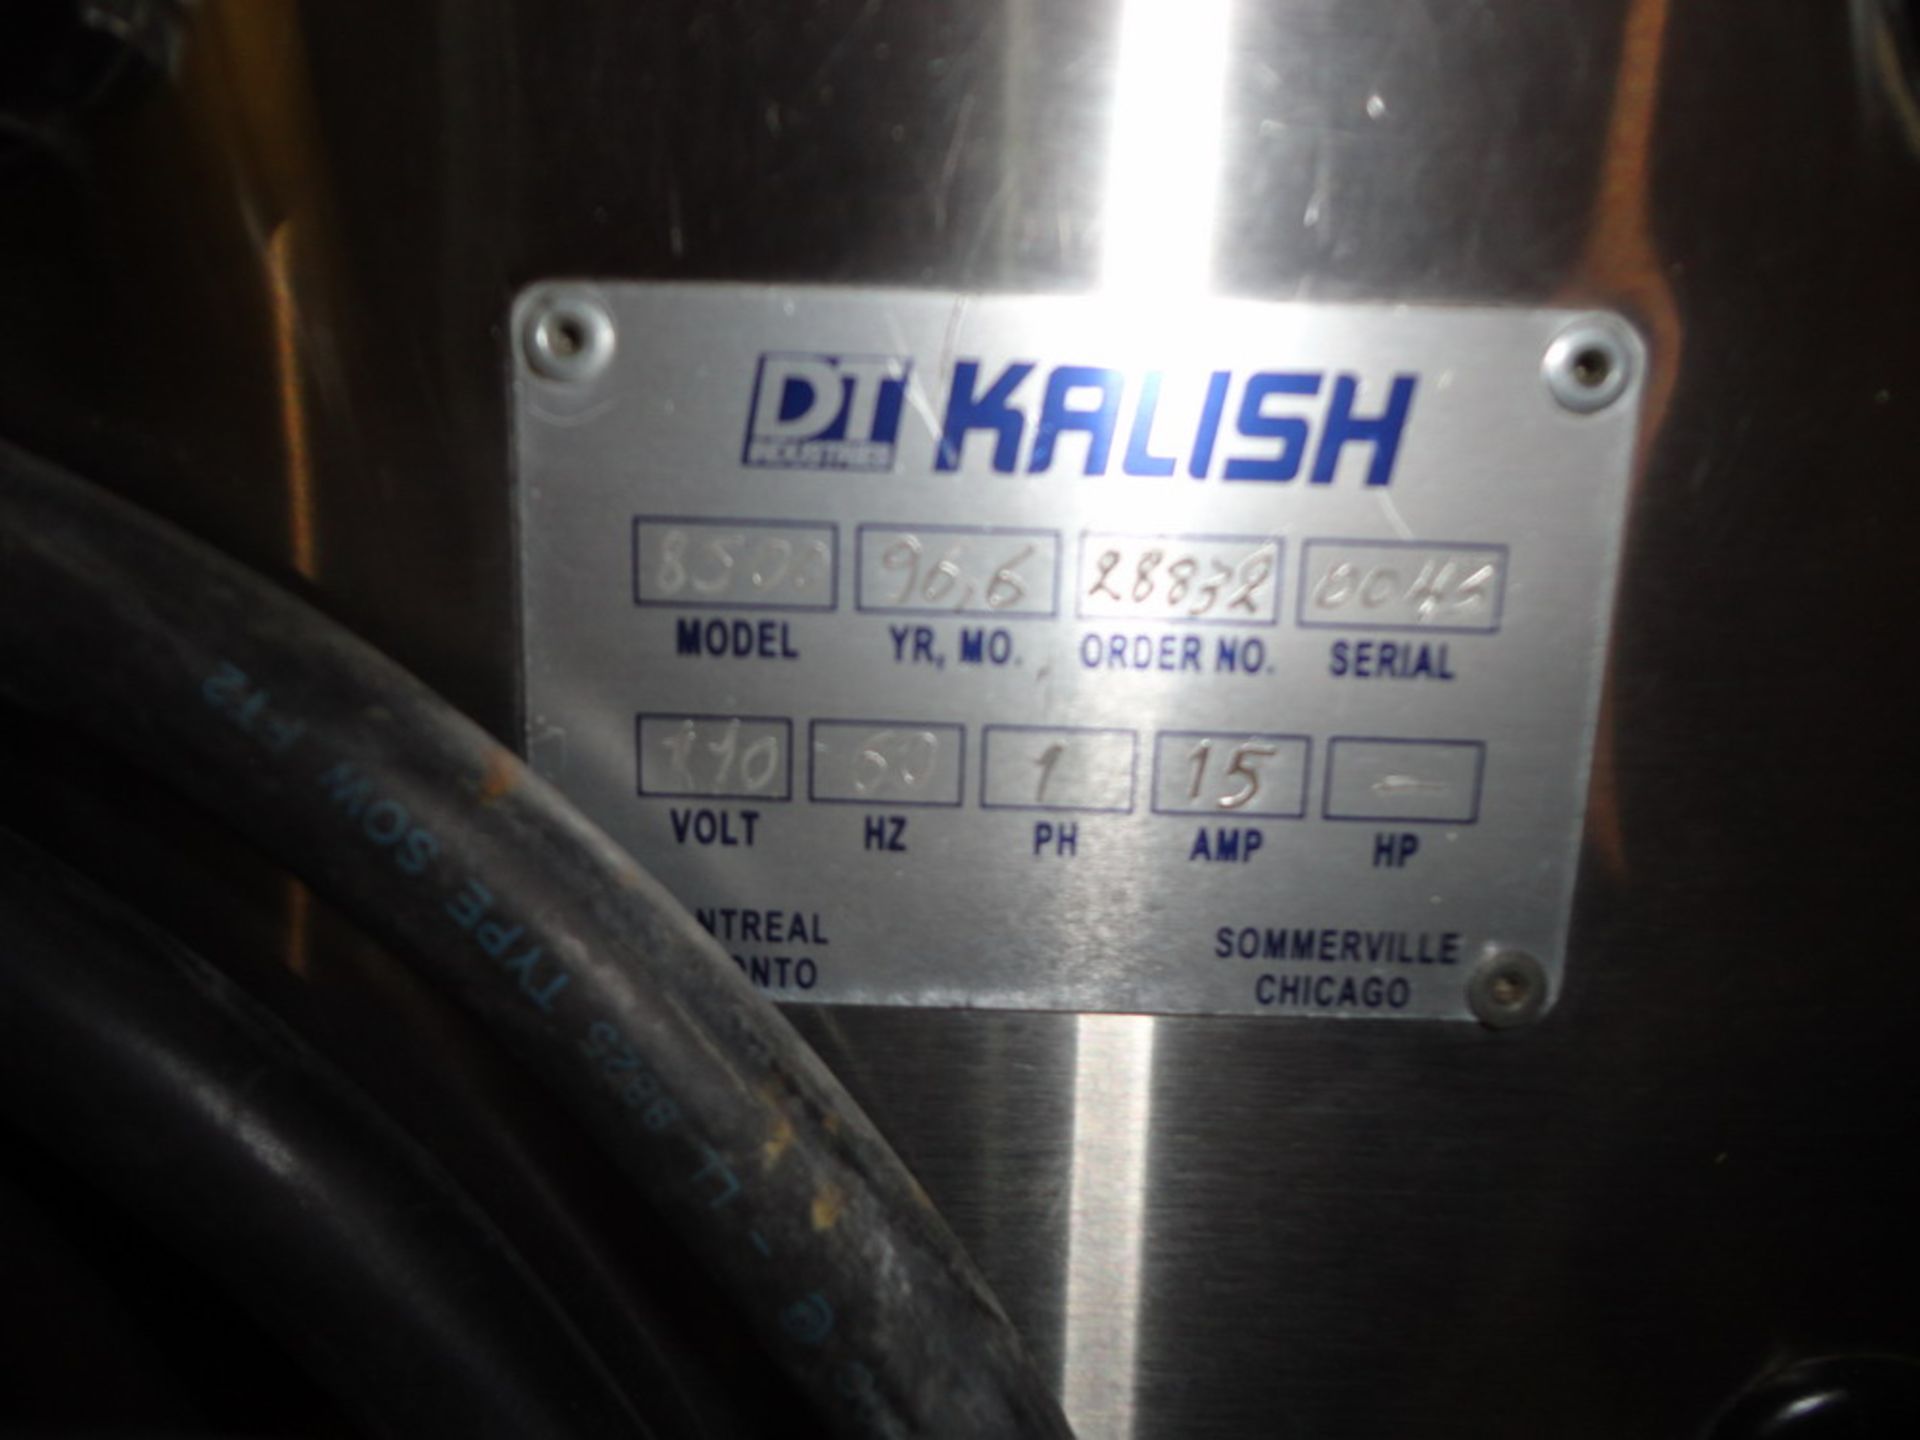 KALISH SMALL VOLUME PHARMACEUTICAL PACKAGING LINE - Image 2 of 5